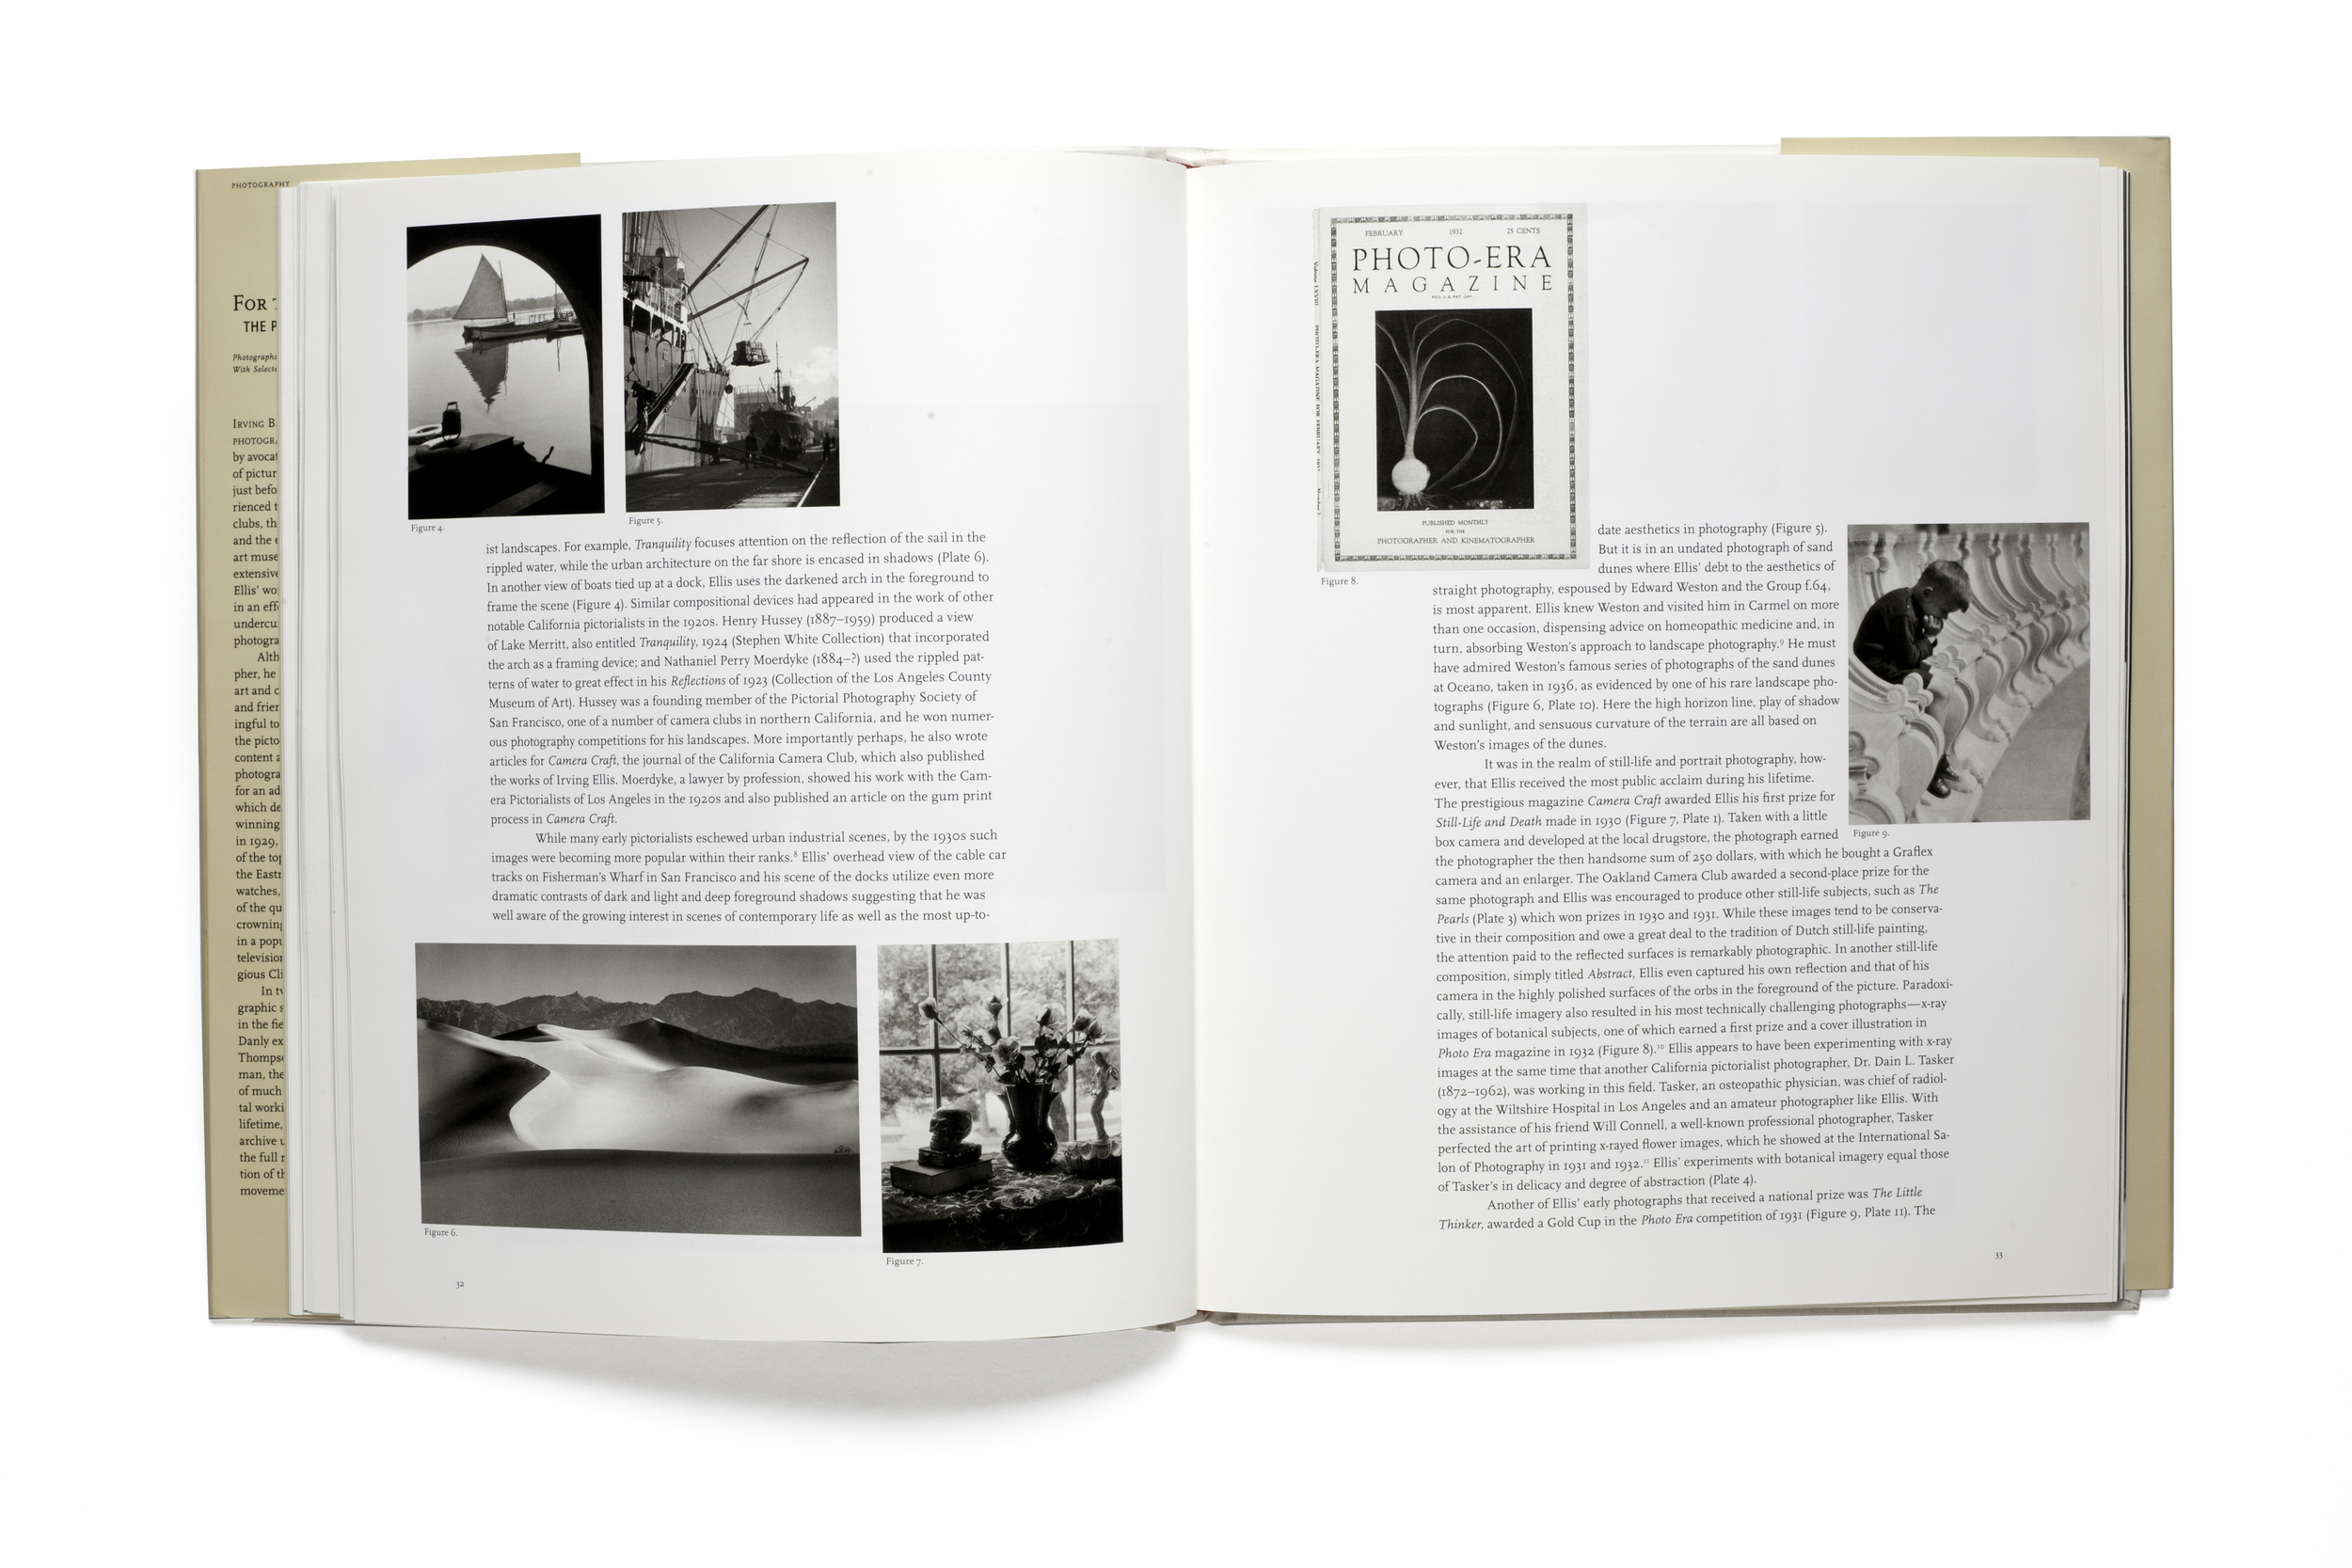   For The Love of It:&nbsp;   The Photography of Irving Bennett Ellis    Pages 32-33  